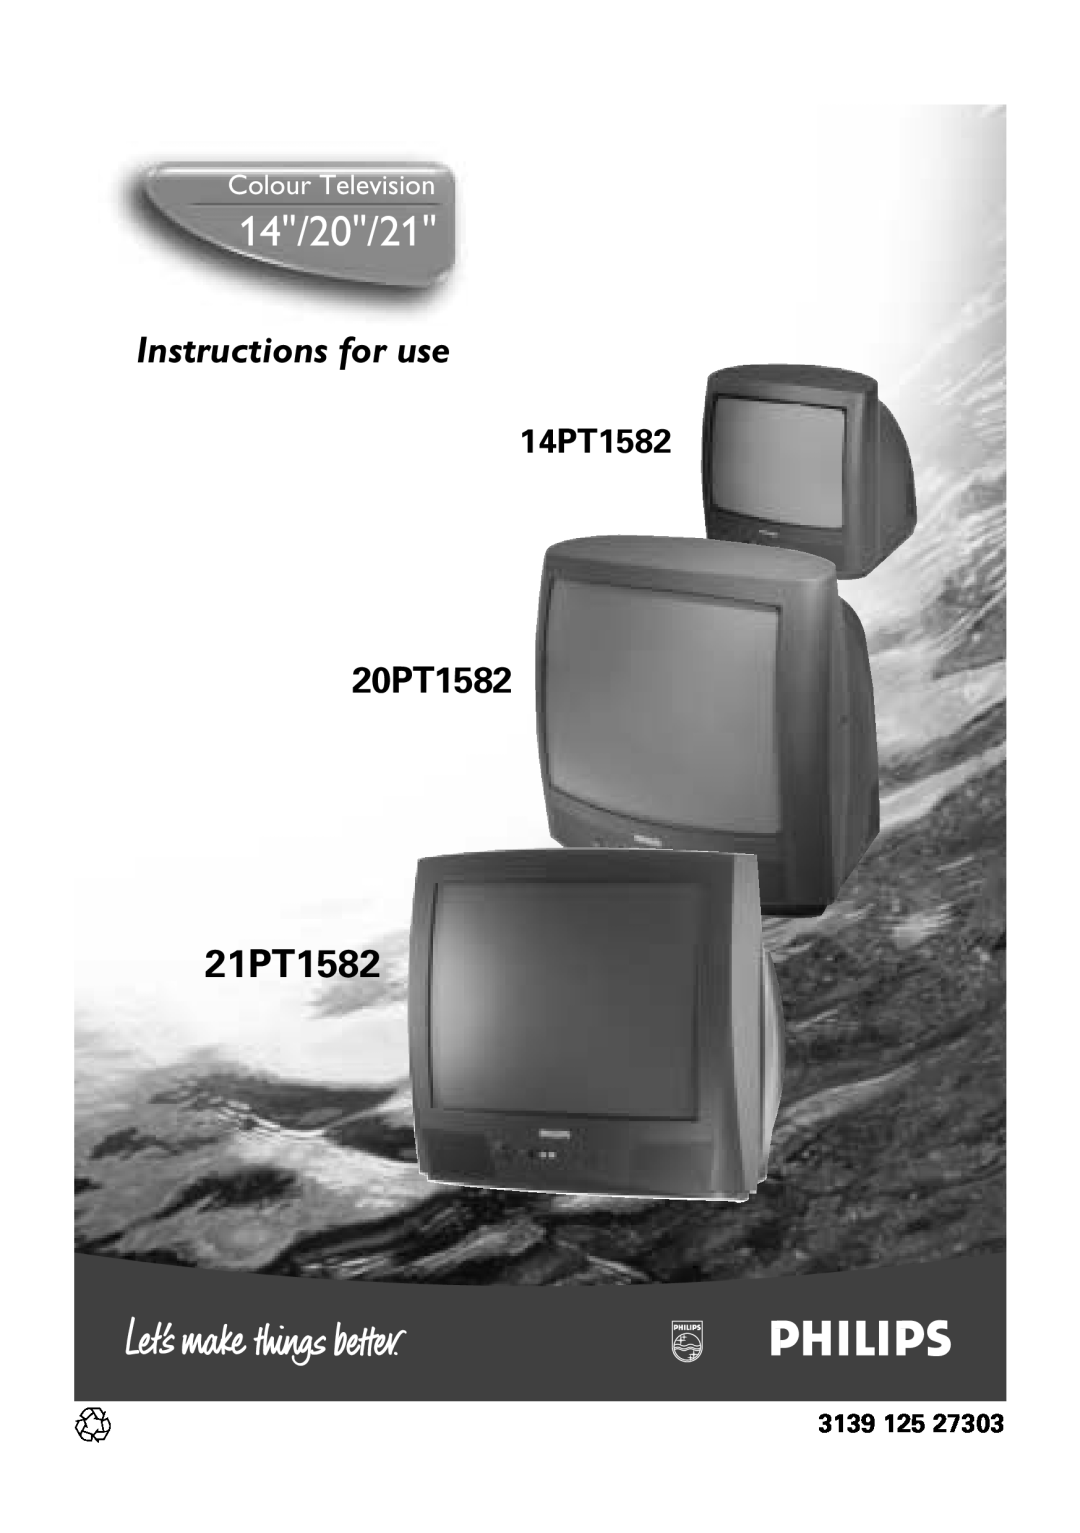 Philips 20PT1582 manual 3139 125, 14/20/21, Instructions for use, 21PT1582, 14PT1582, Colour Television 